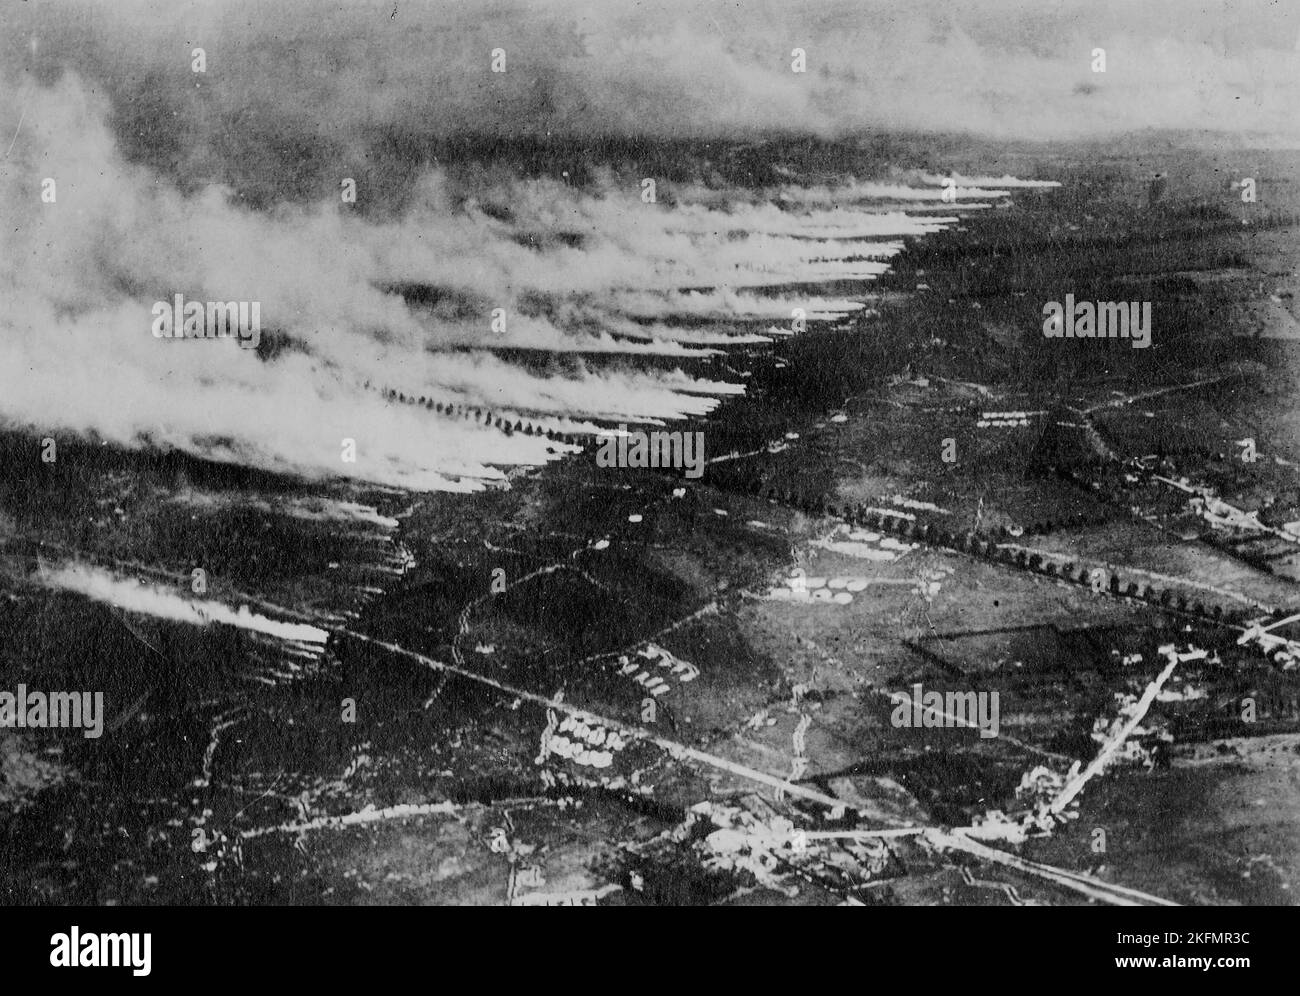 WESTERN FRONT, FRANCE - circa 1915 - Aerial photograph of a gas attack on the Somme battlefield using metal canisters of liquid gas. When the canister Stock Photo